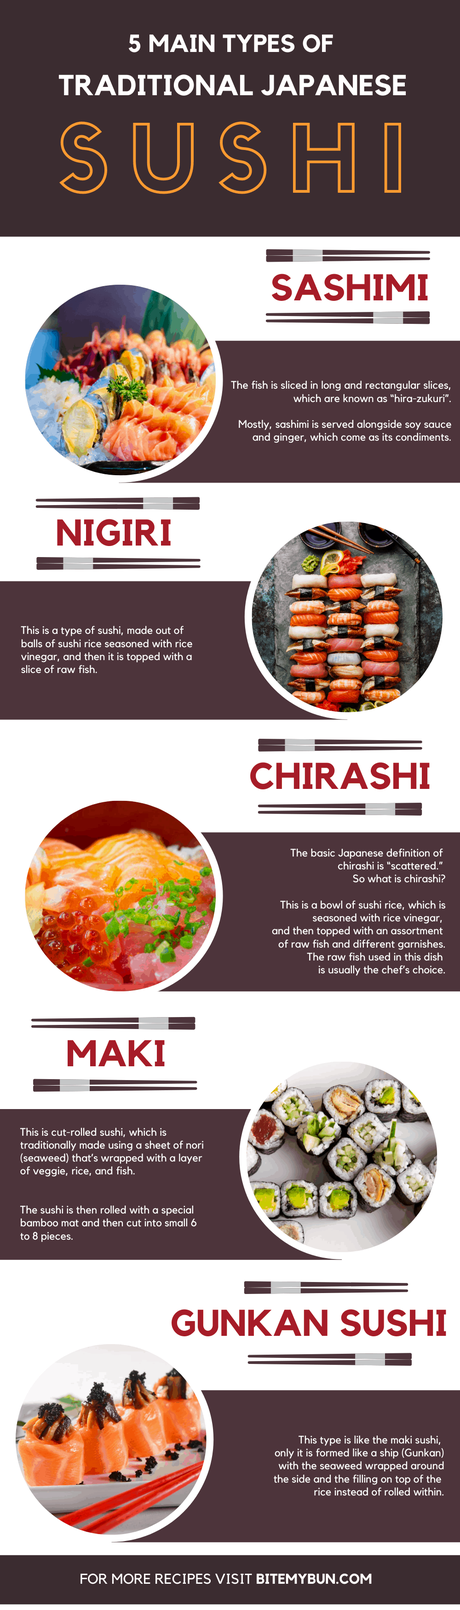 Types of Traditional Sushi